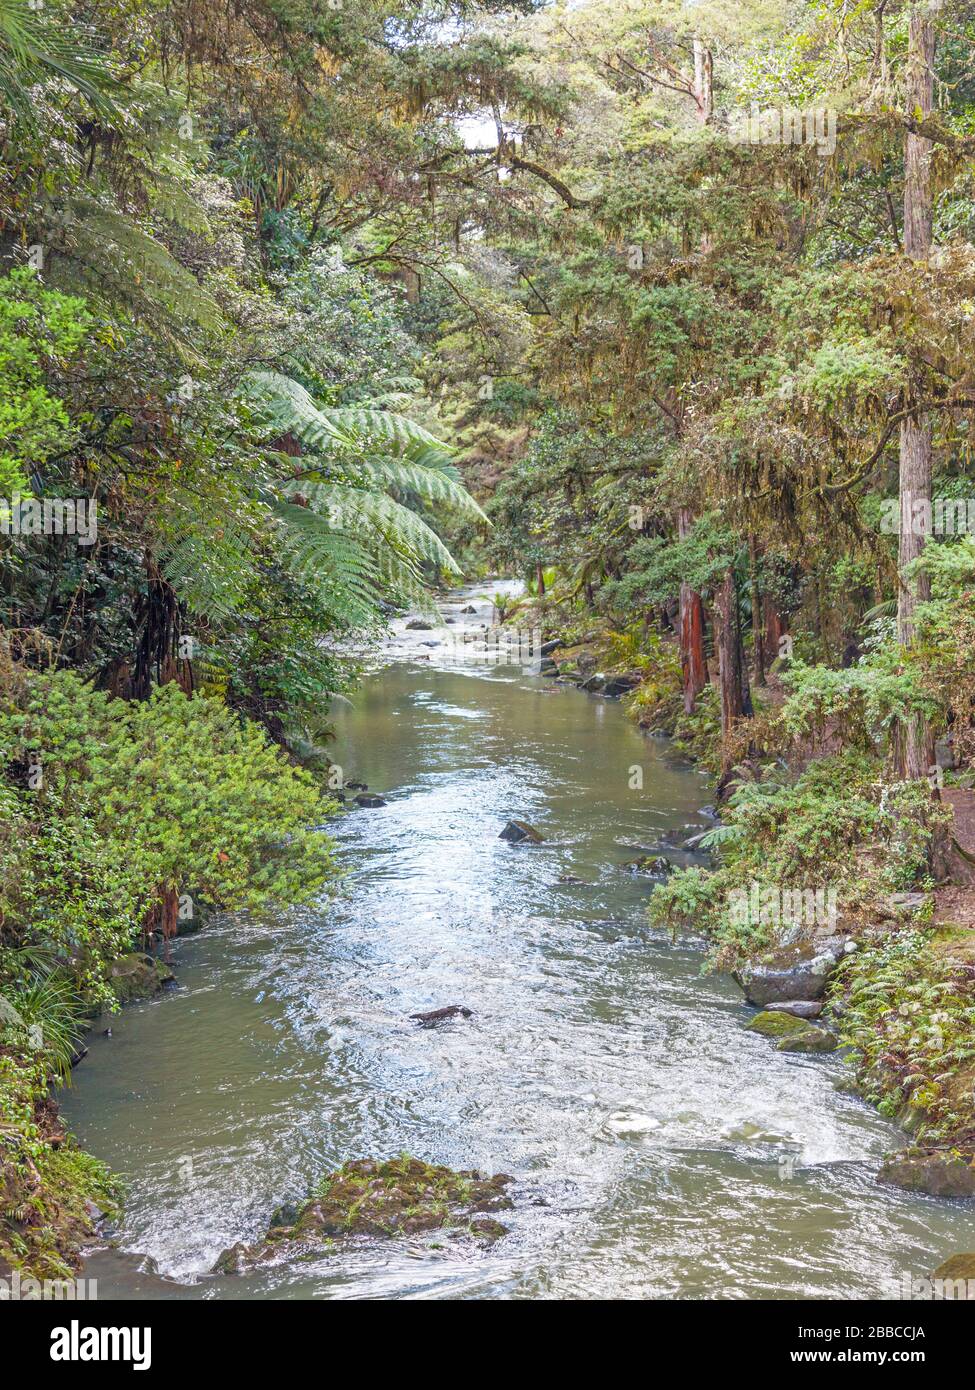 The Hatea River flowing below Whangarei Falls in Whangarei Scenic Reserve in North Island, New Zealand. Stock Photo